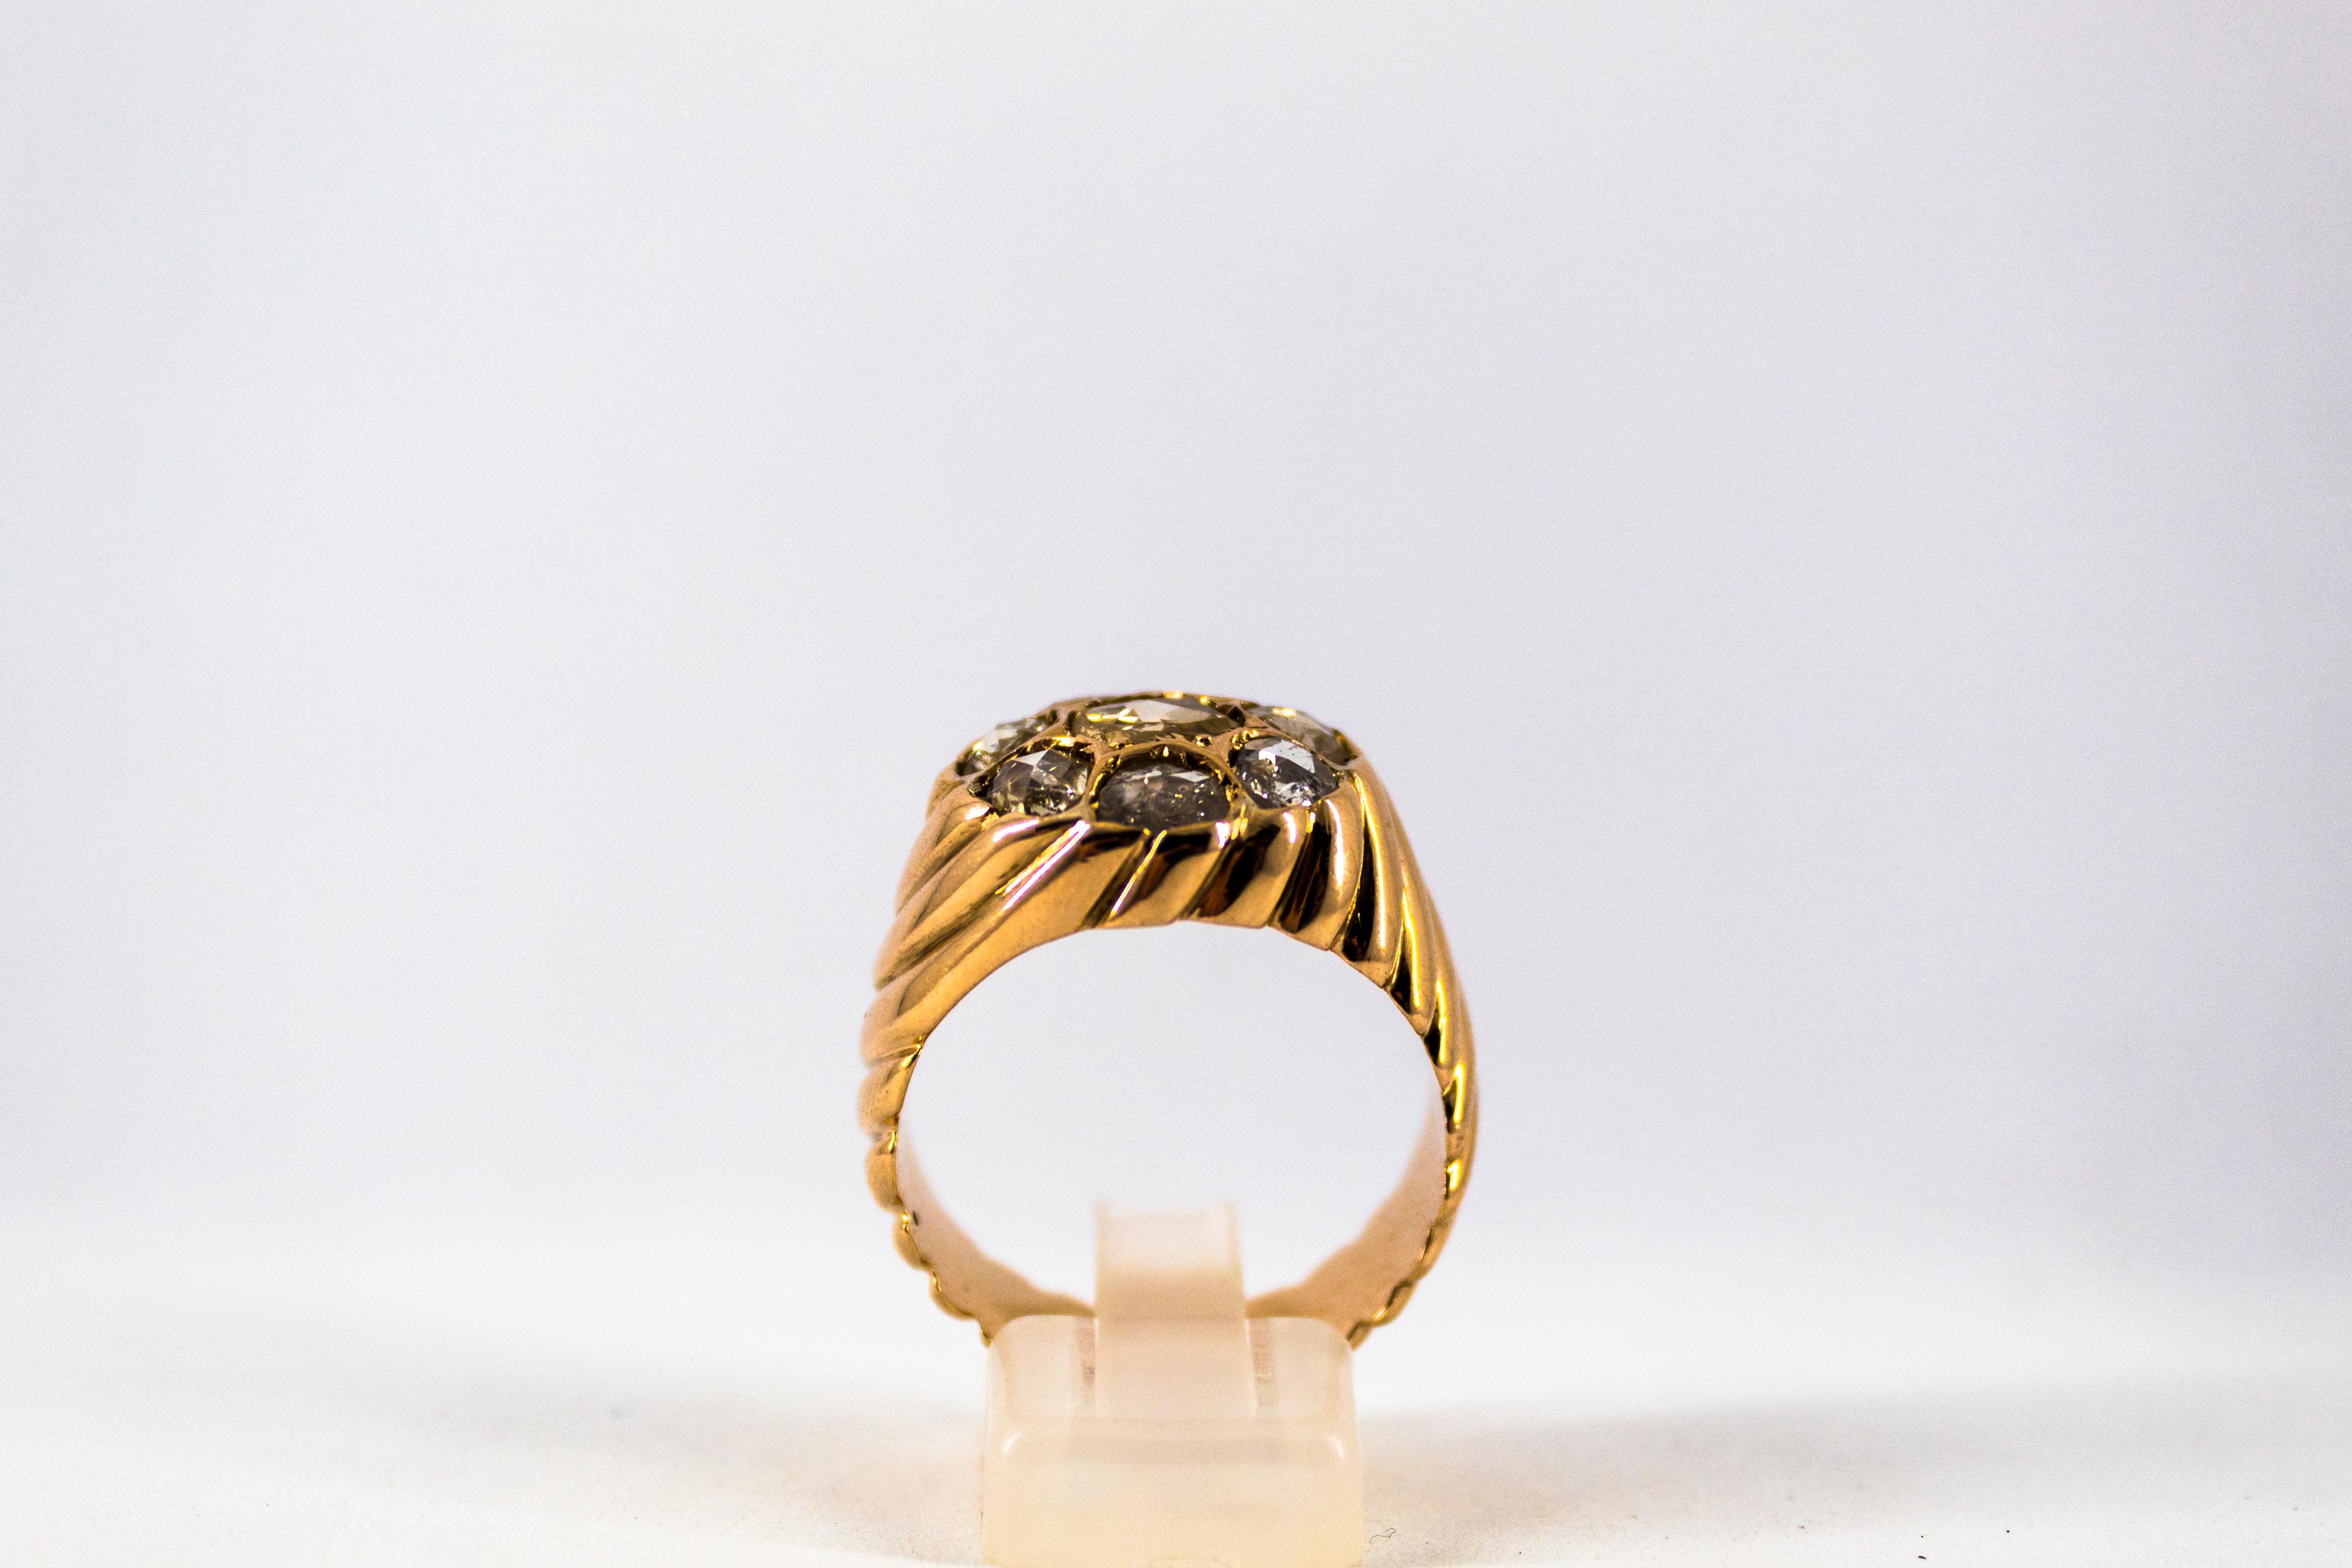 This Ring is made of 14K Yellow Gold.
This Ring has 2.80 Carats of White Rose Cut Diamonds.
Size ITA: 28 USA: 12
We're a workshop so every piece is handmade, customizable and resizable.